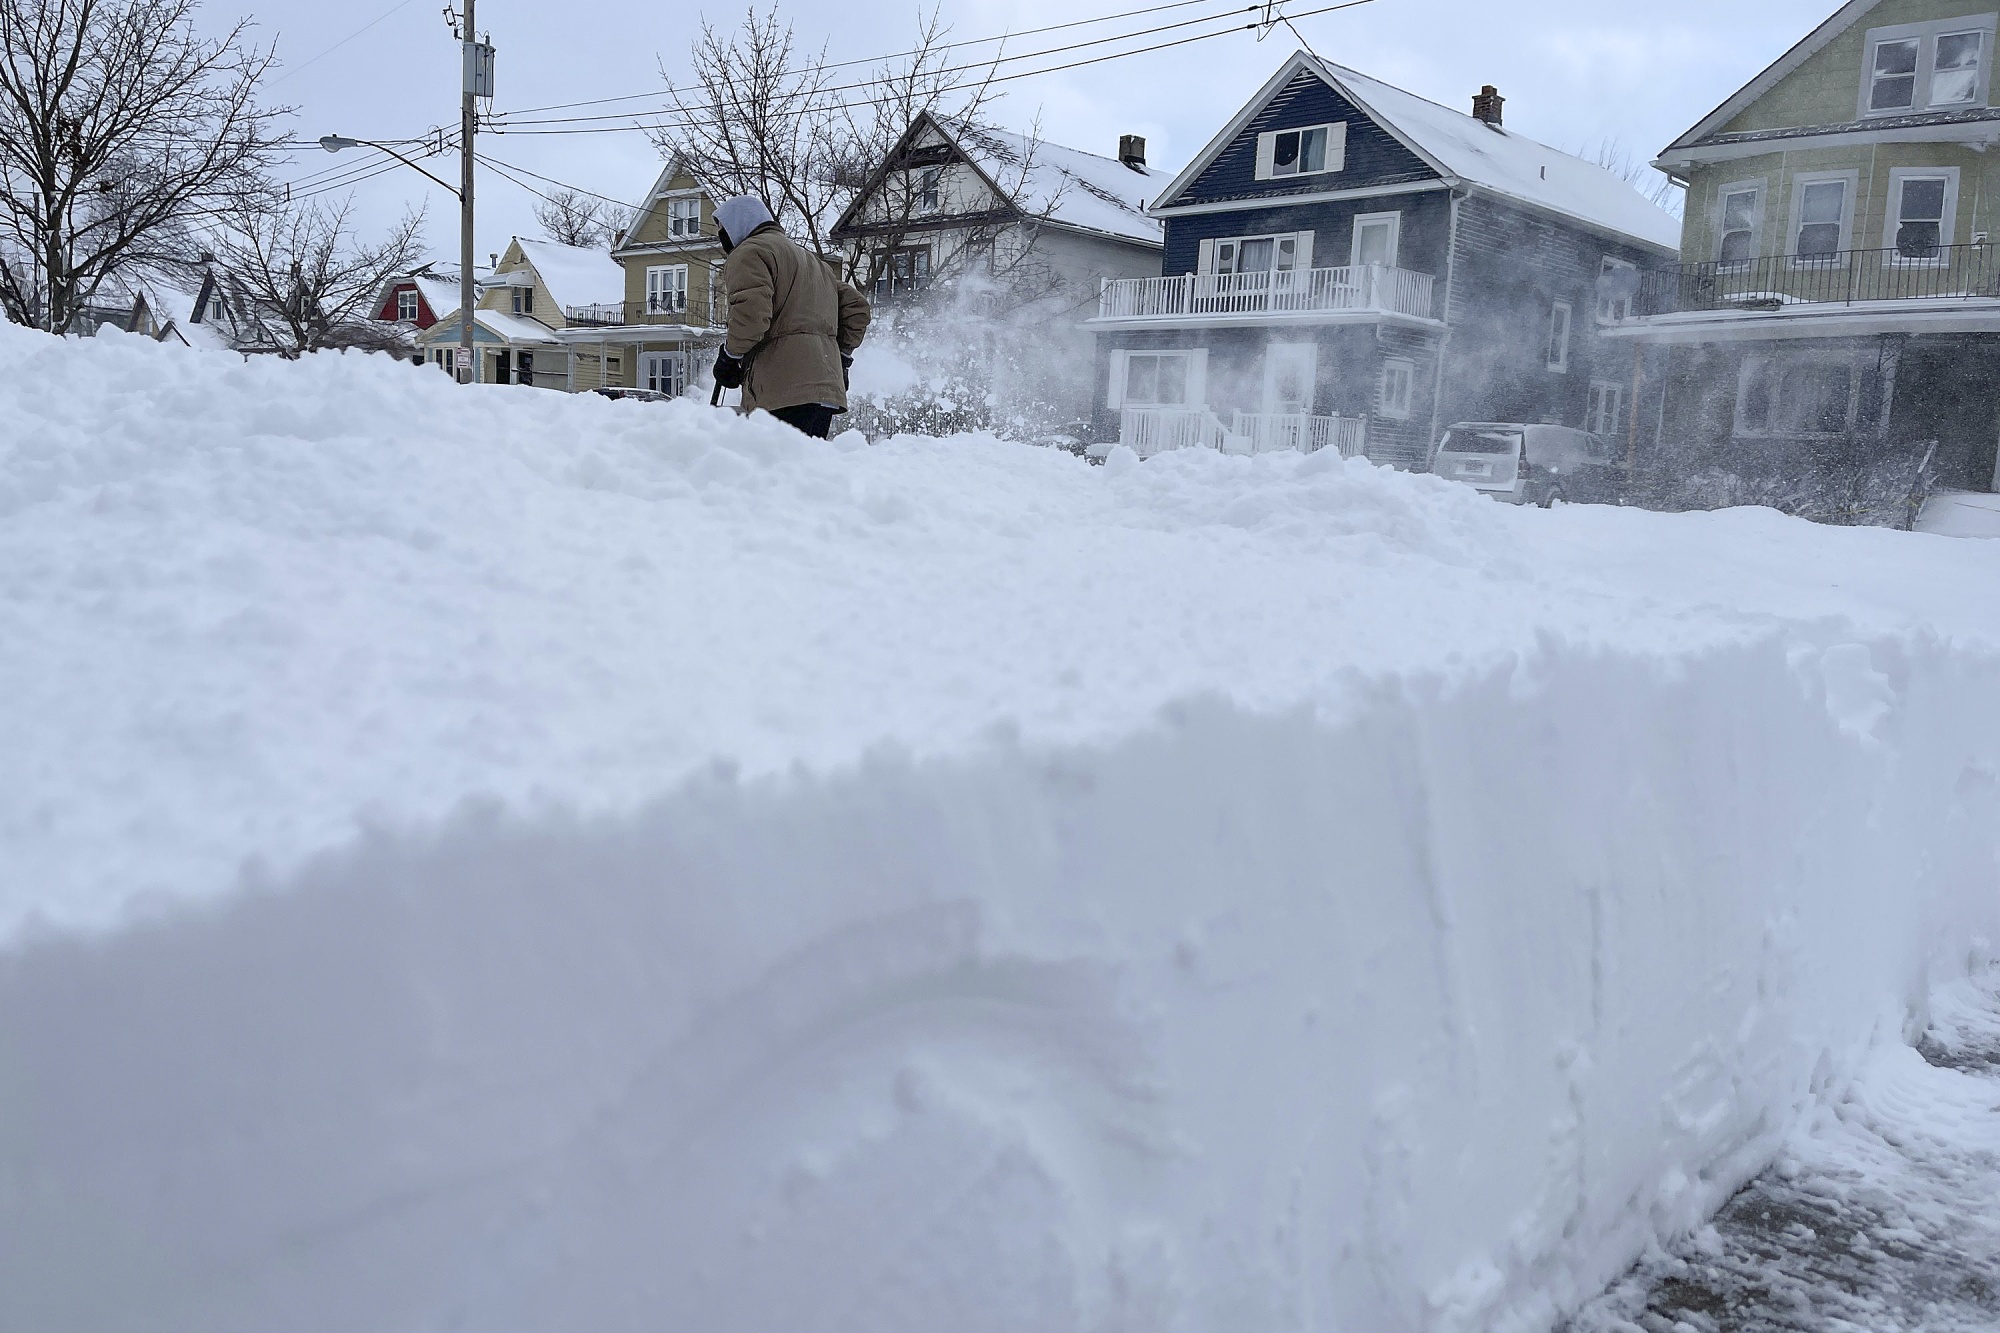 A resident clears snow near their&nbsp;property in Buffalo, New York, on Dec. 25.